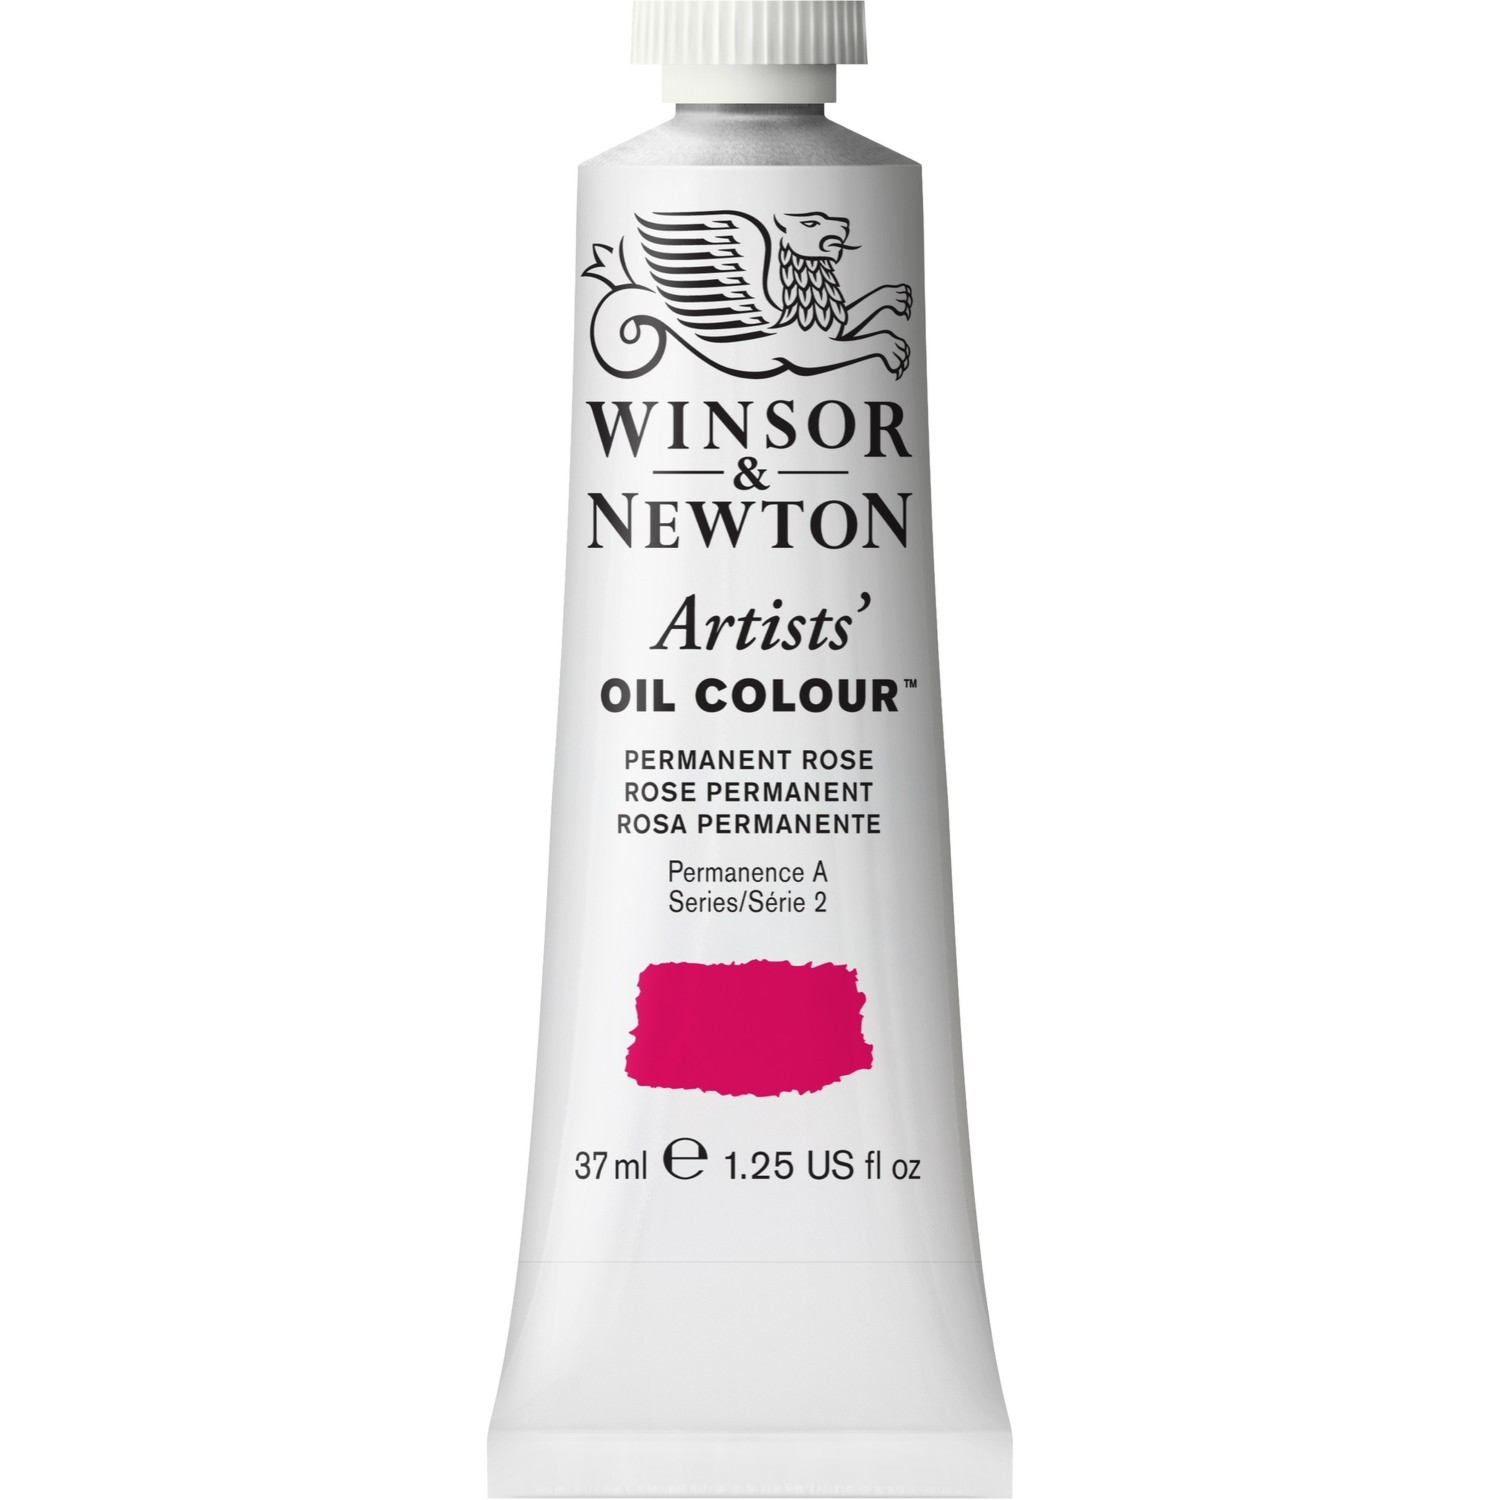 Winsor and Newton 37ml Artists' Oil Colours - Permanent Rose Image 1